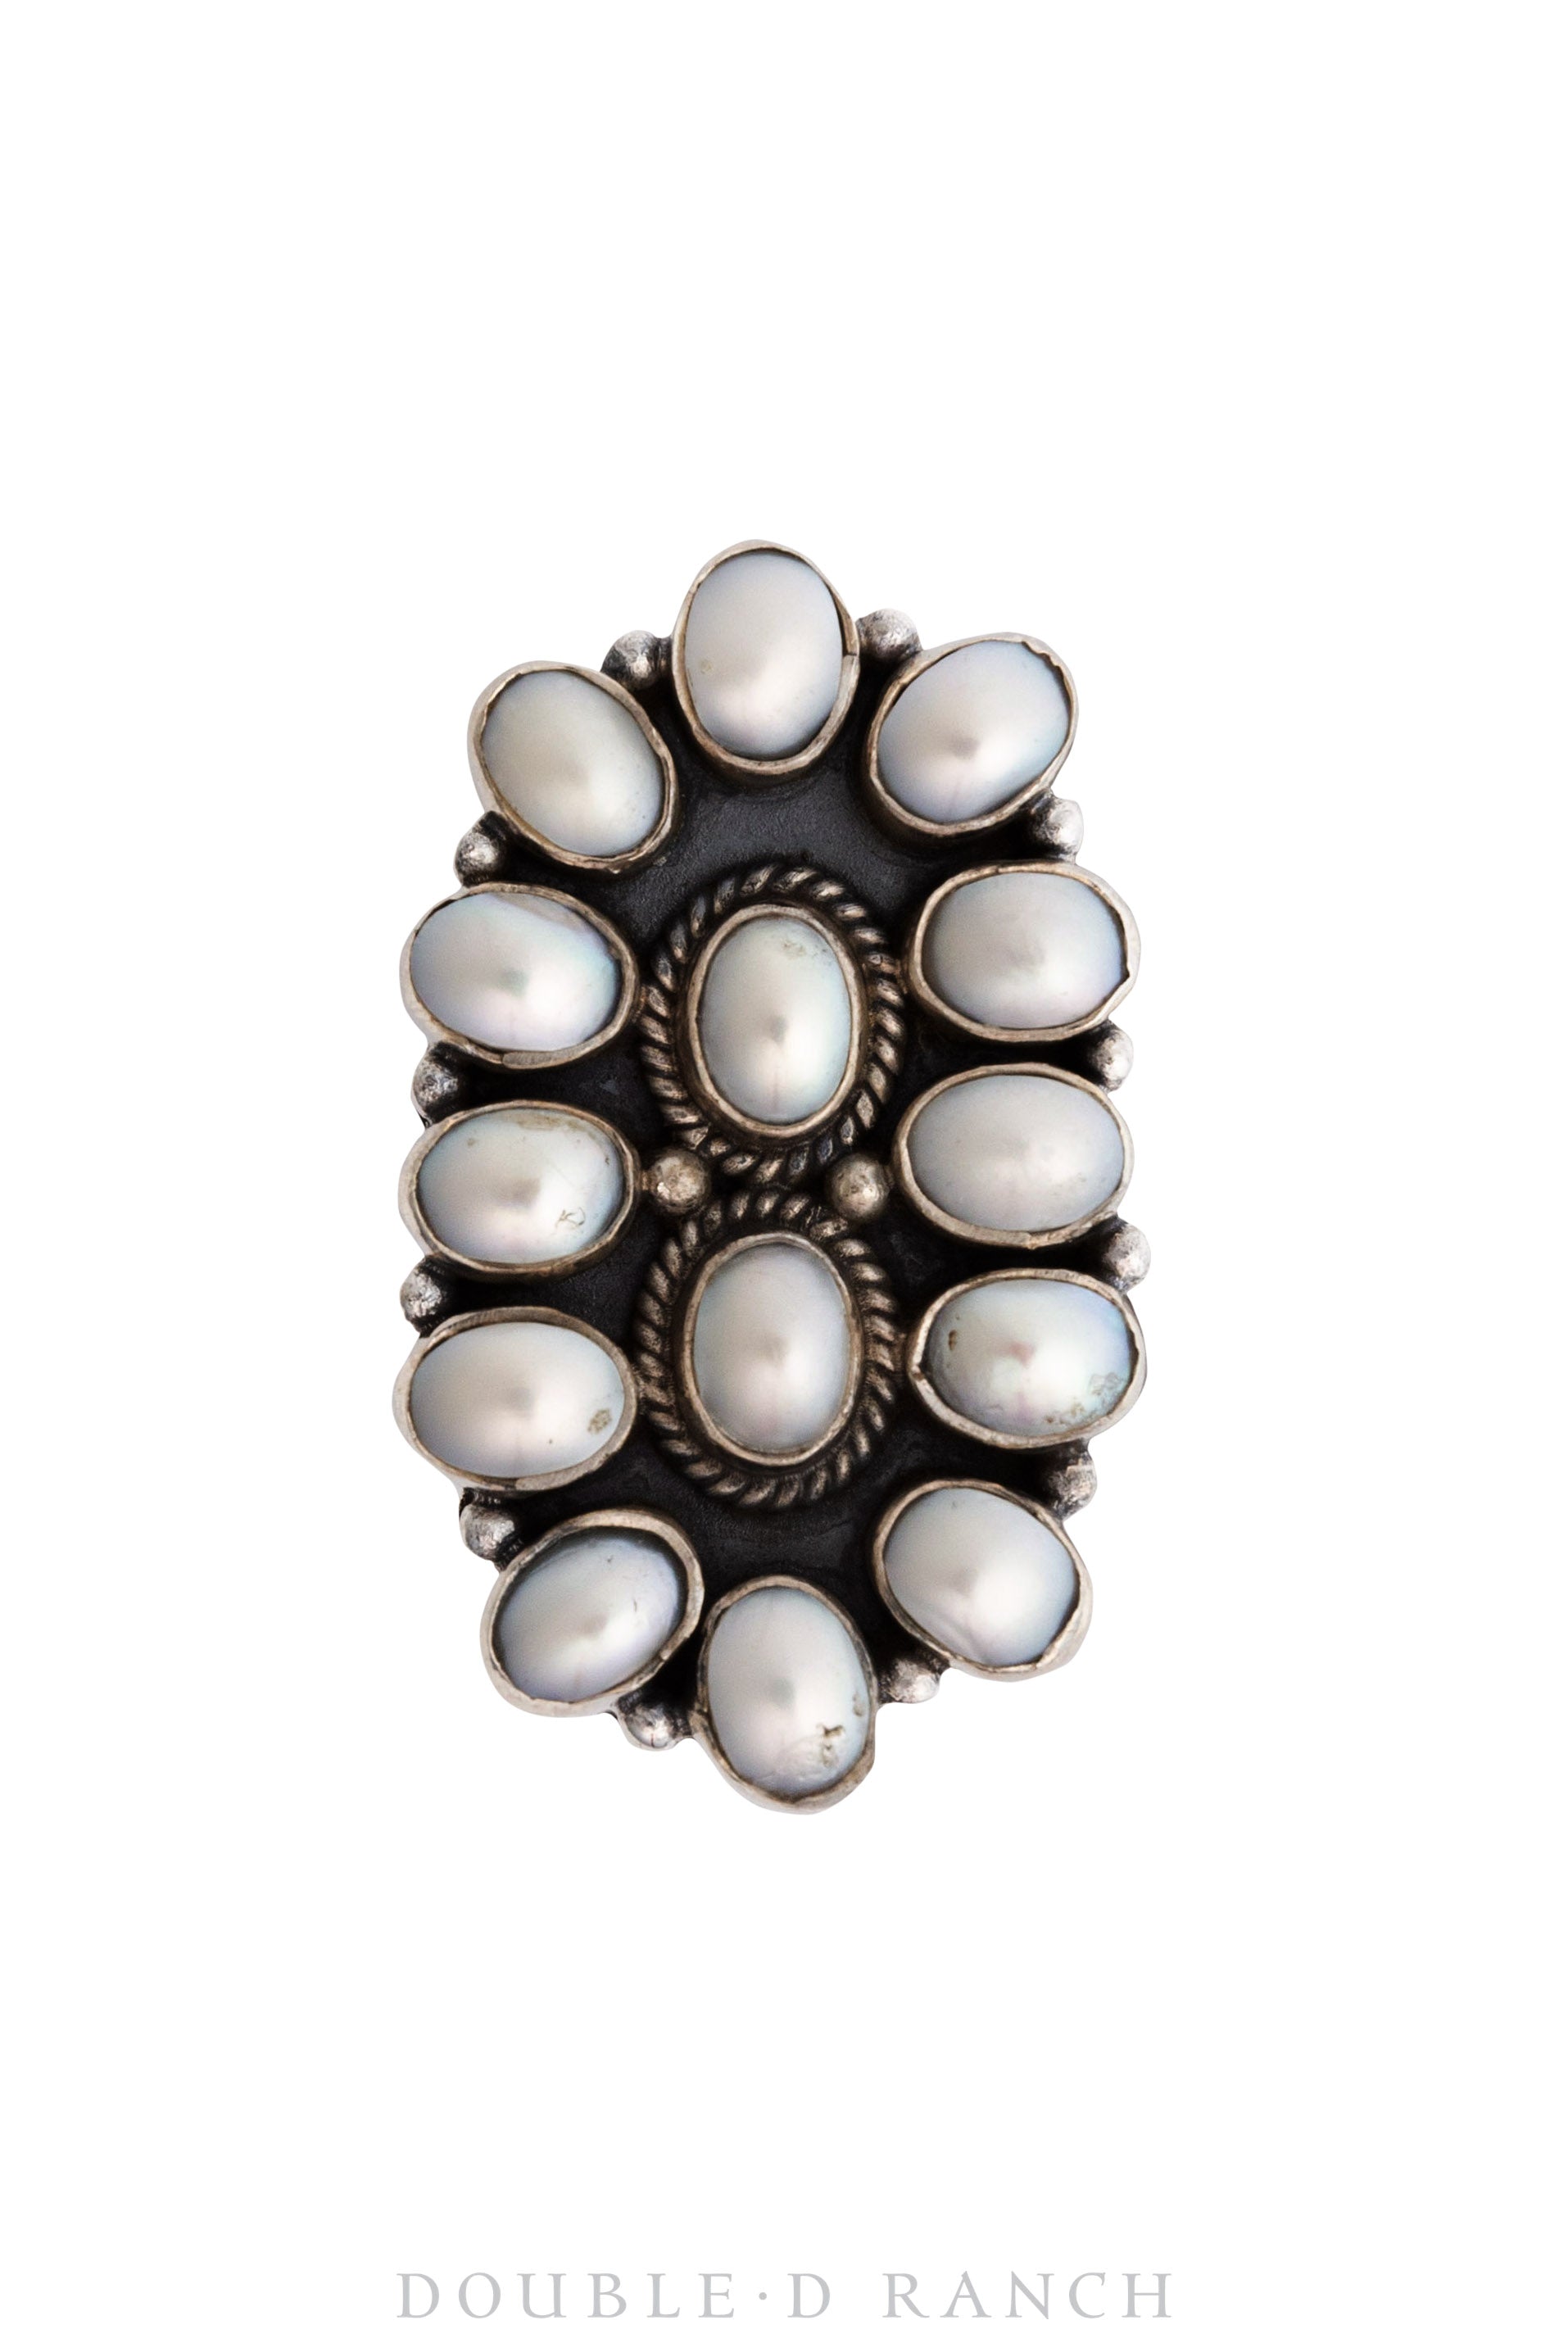 Ring, Cluster, Mother of Pearl, Hallmark, Contemporary, 1193